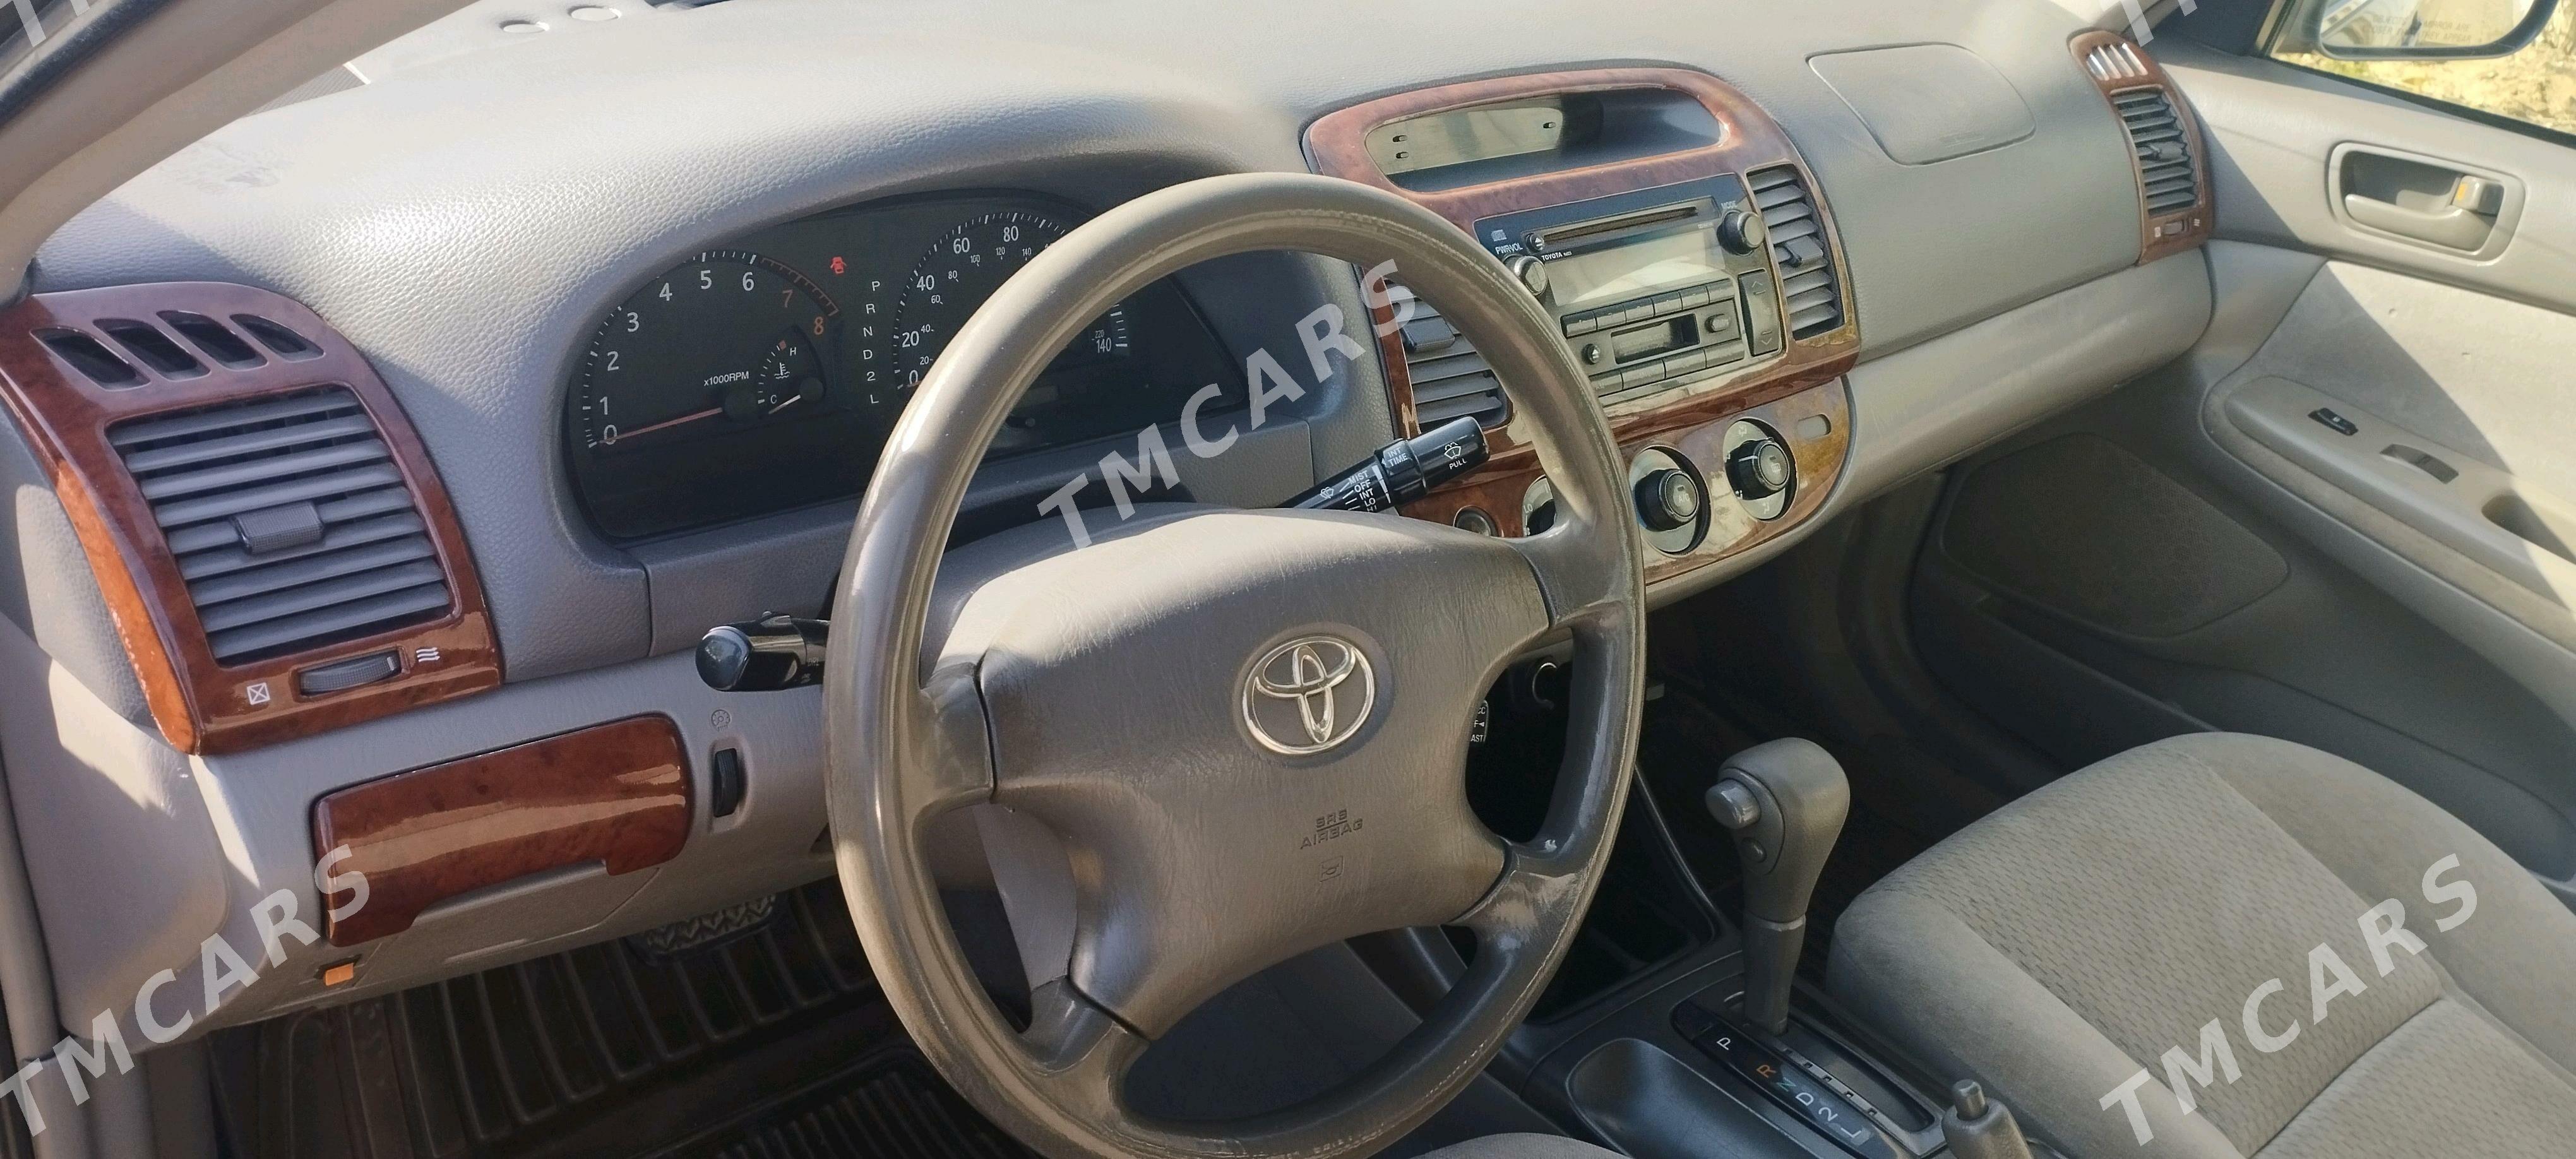 Toyota Camry 2002 - 120 000 TMT - Mary - img 2